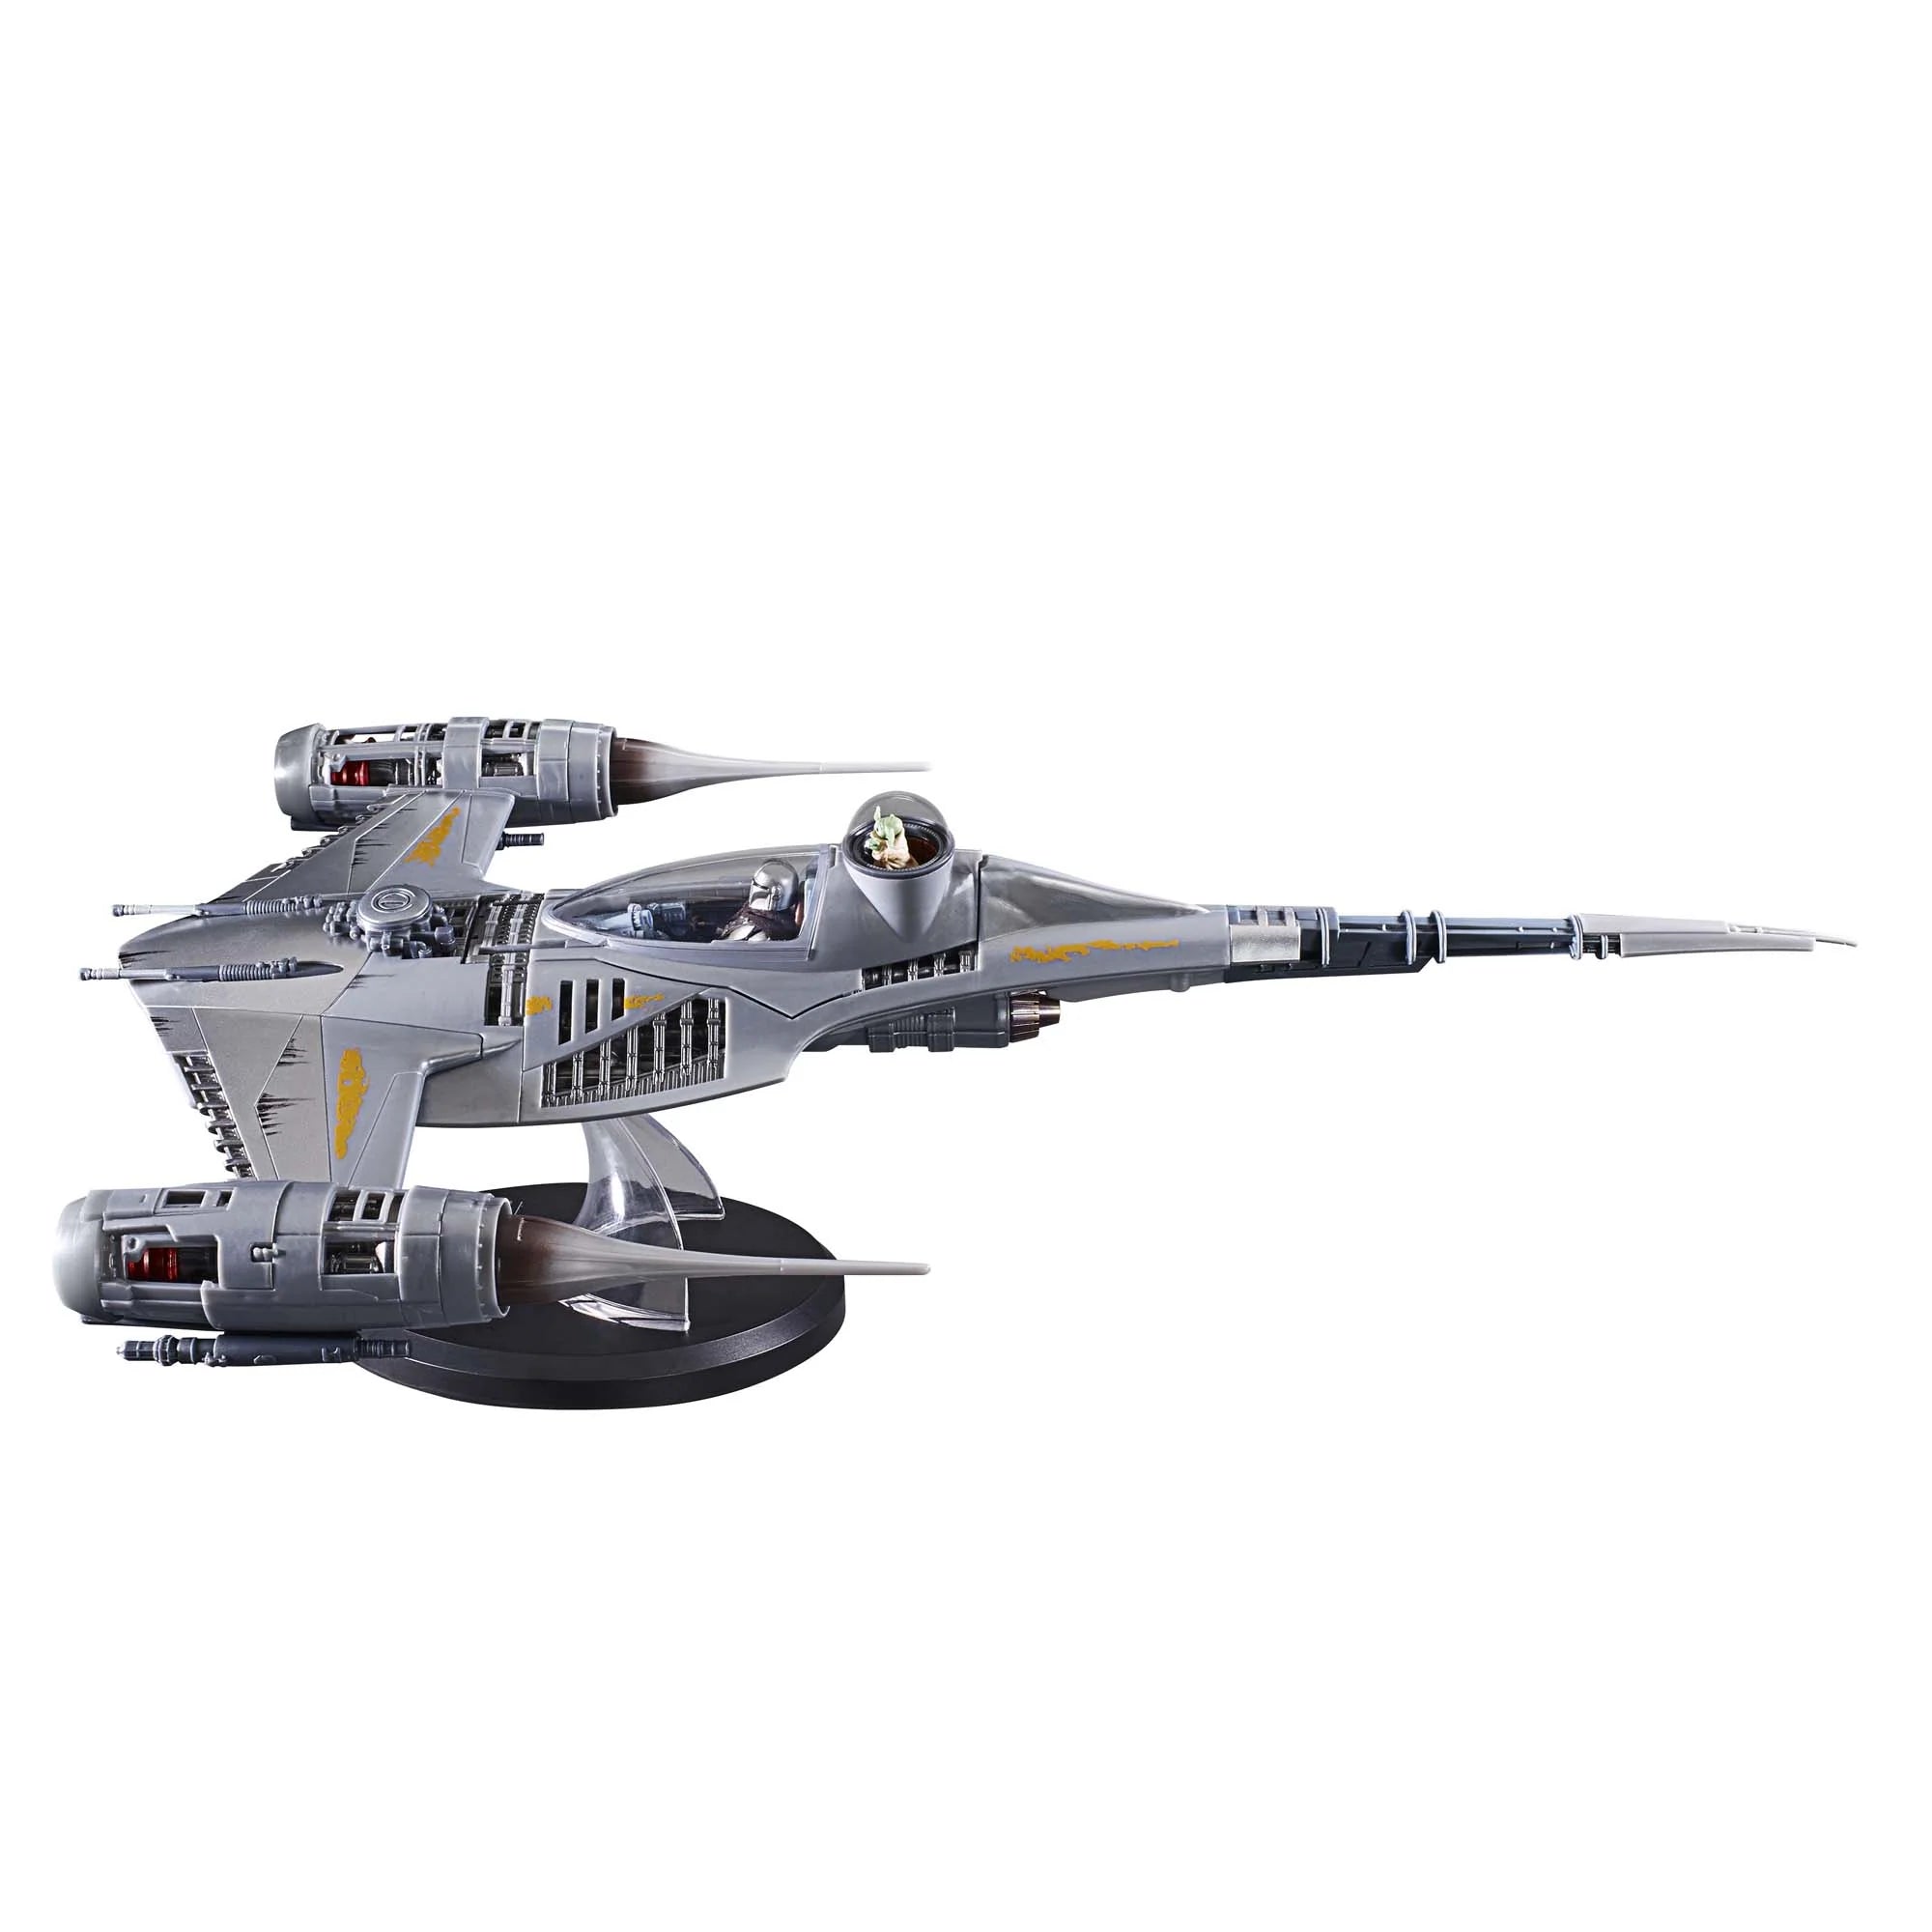 Hasbro - Star Wars: The Vintage Collection - 3.75&quot; - Star Wars: The Mandalorian - N-1 Naboo Starfighter (Reissue) - Marvelous Toys